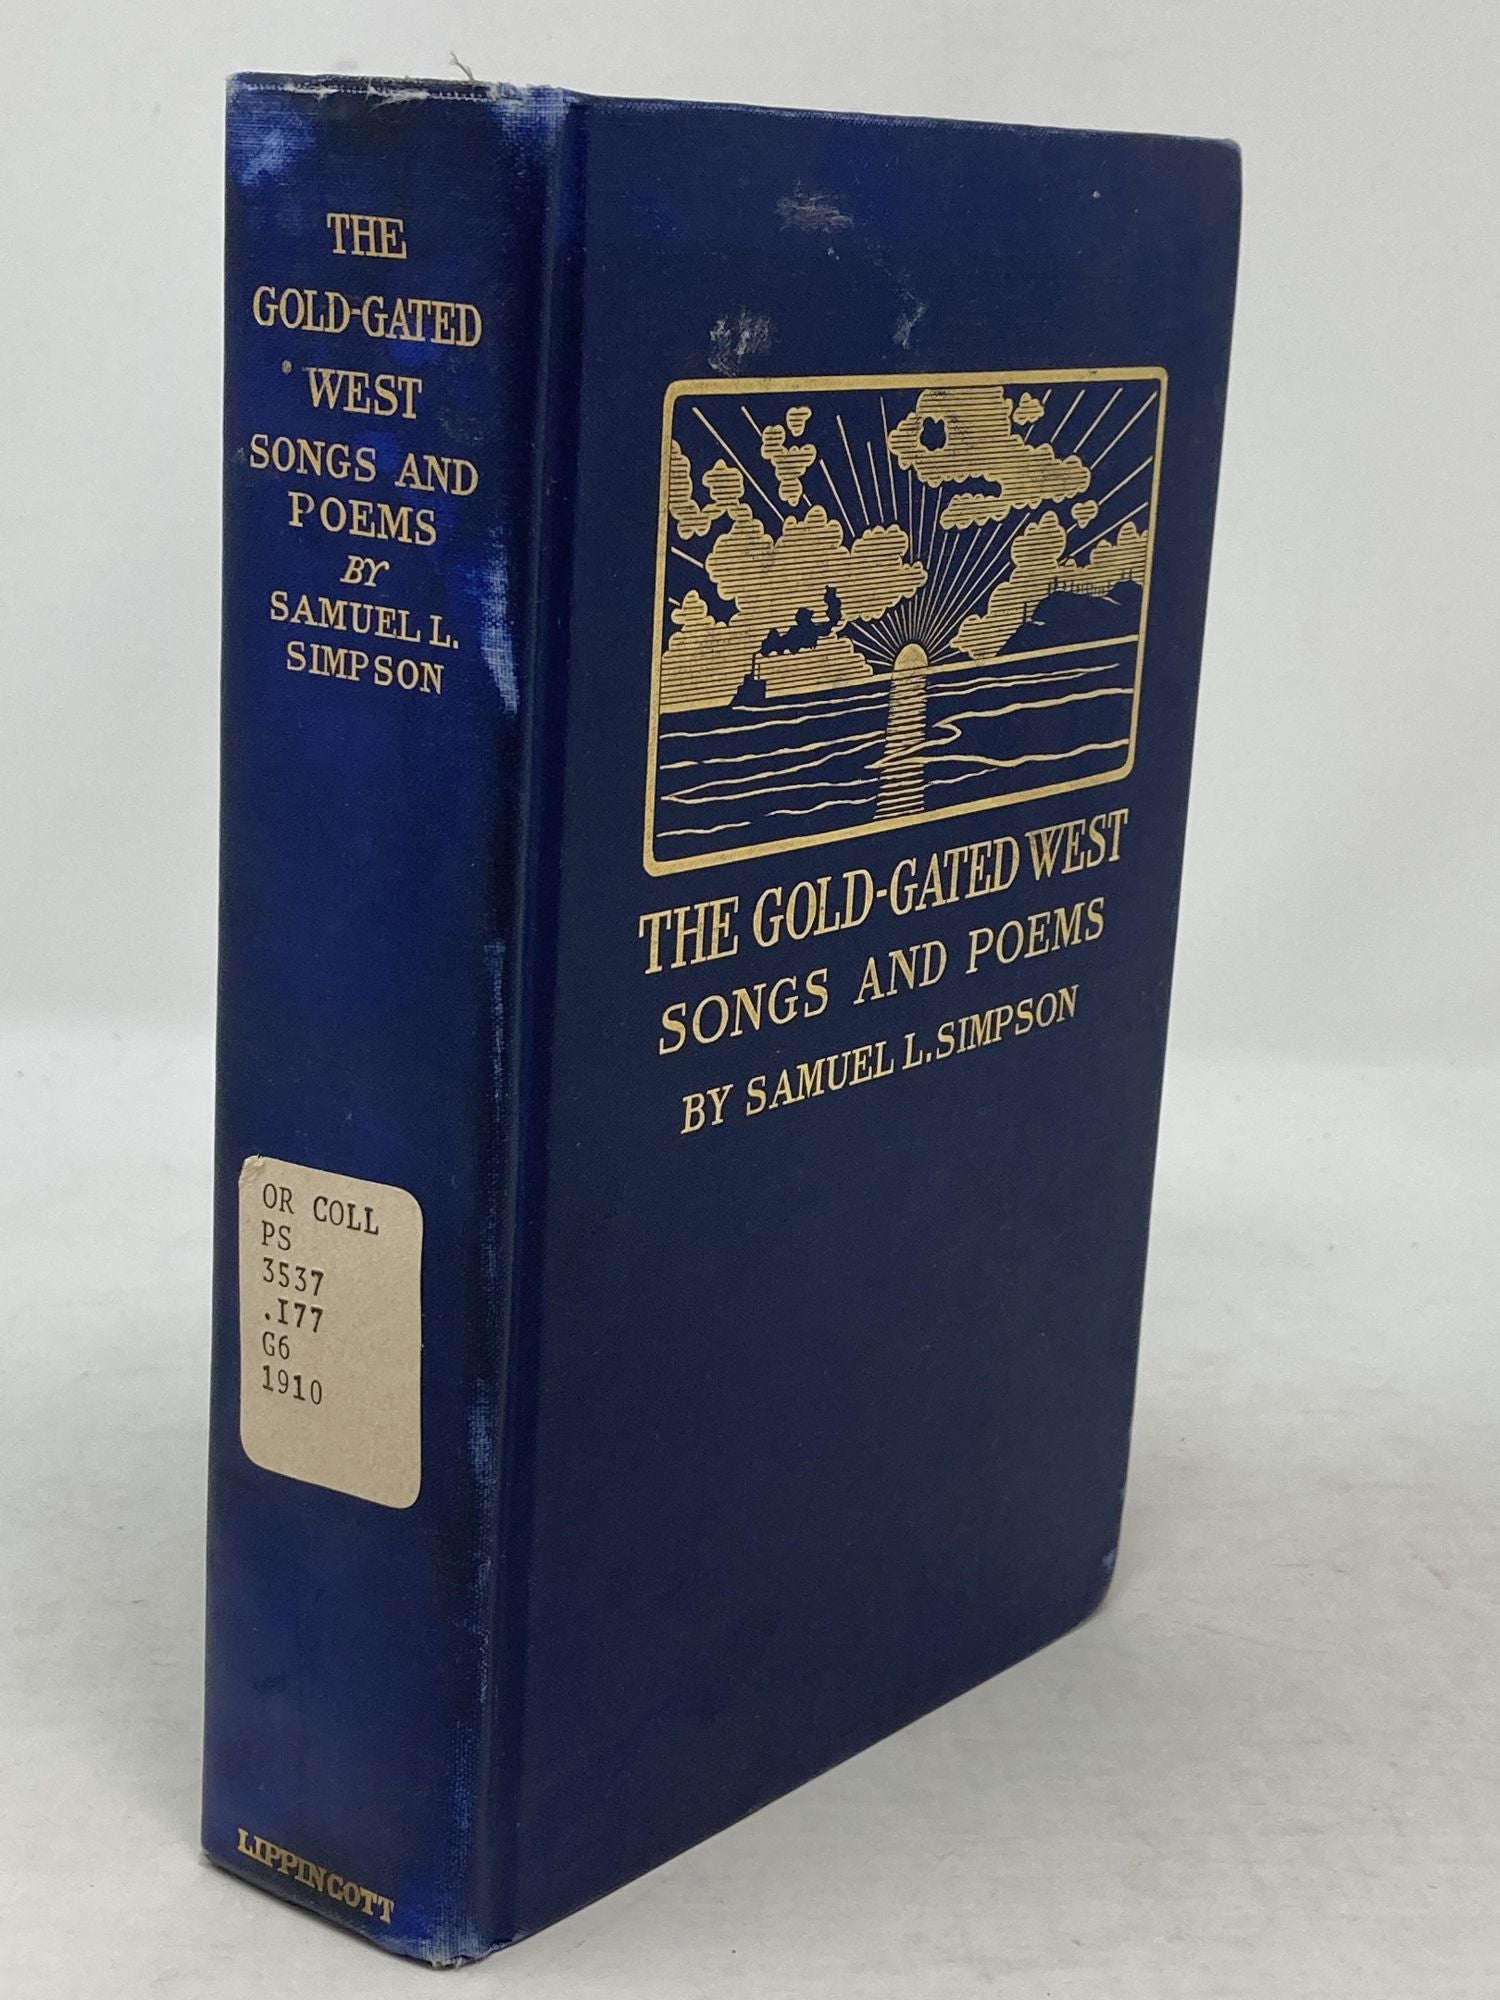 Simpson, Samuel L. ; (Edited W.T. Burney) - The Gold-Gated West : Songs and Poems